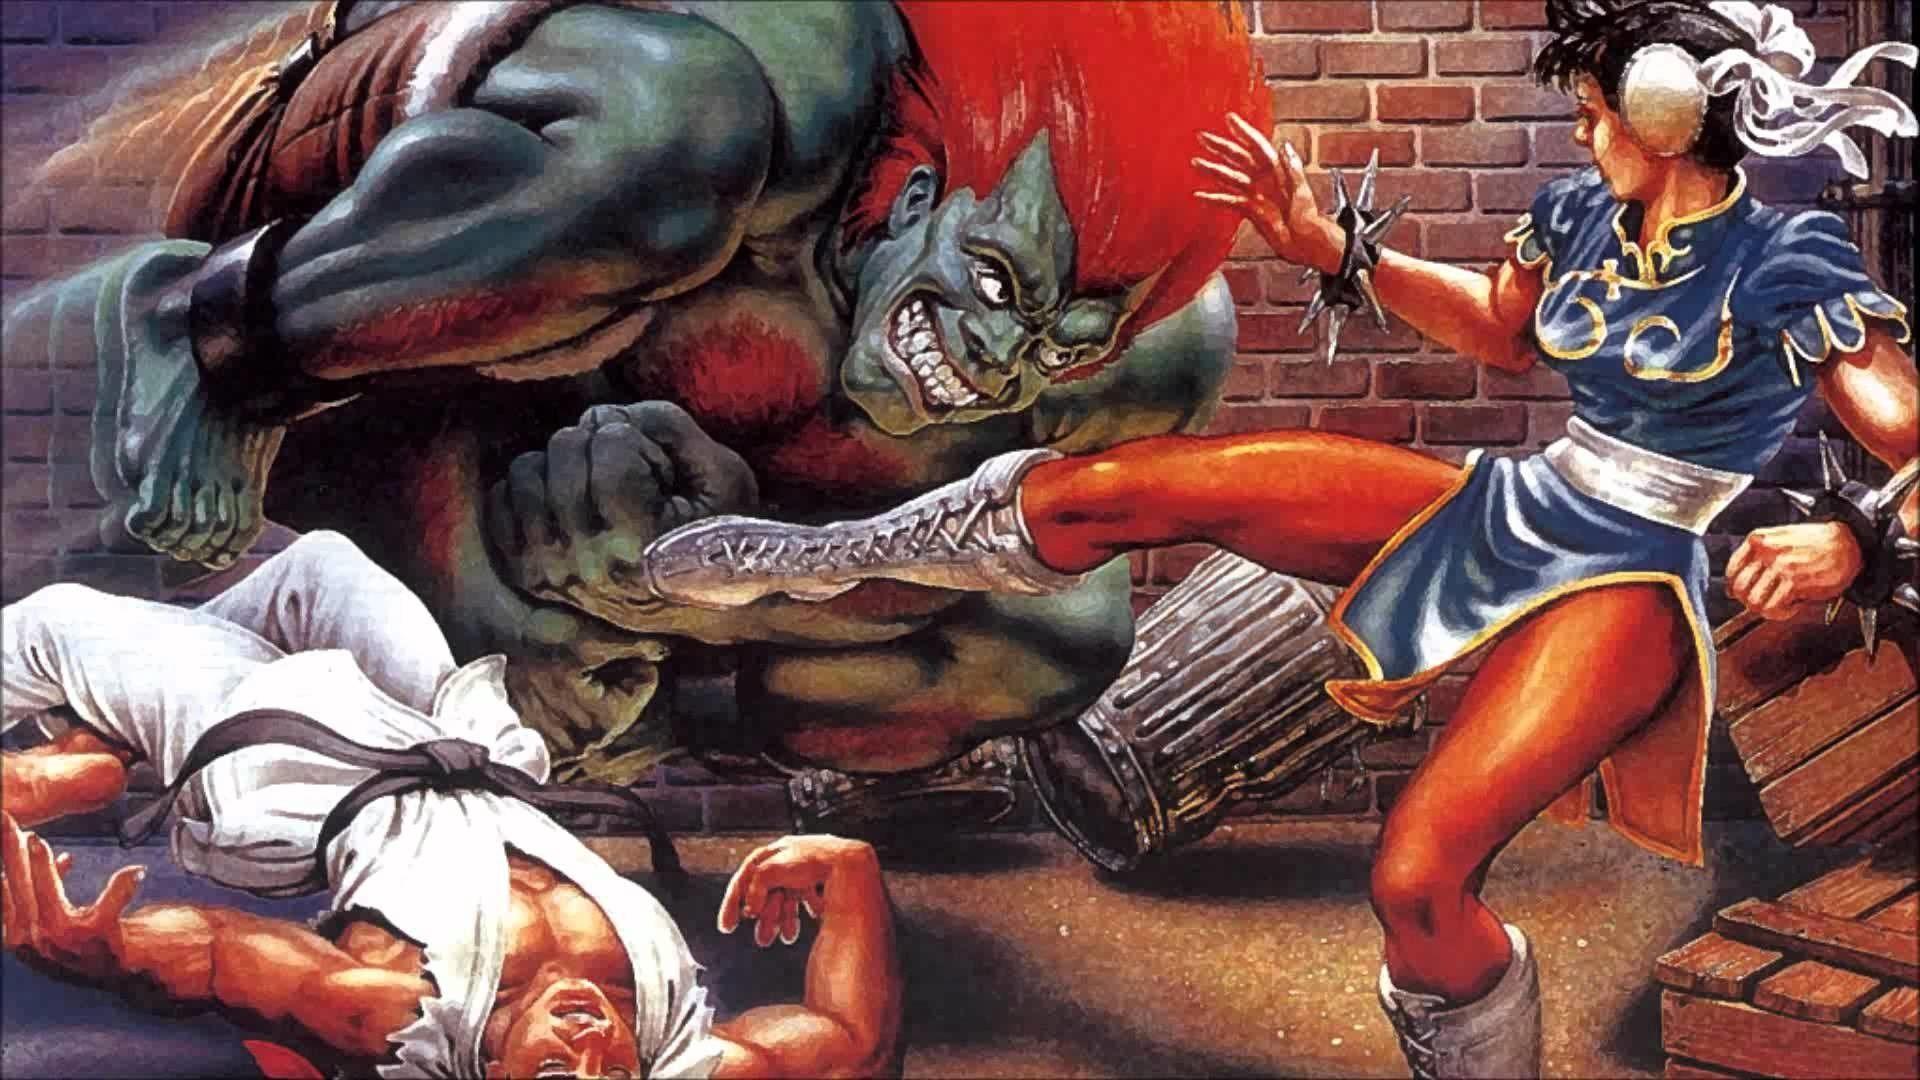 Street Fighter Alpha 2 Archives - Nintendo Everything